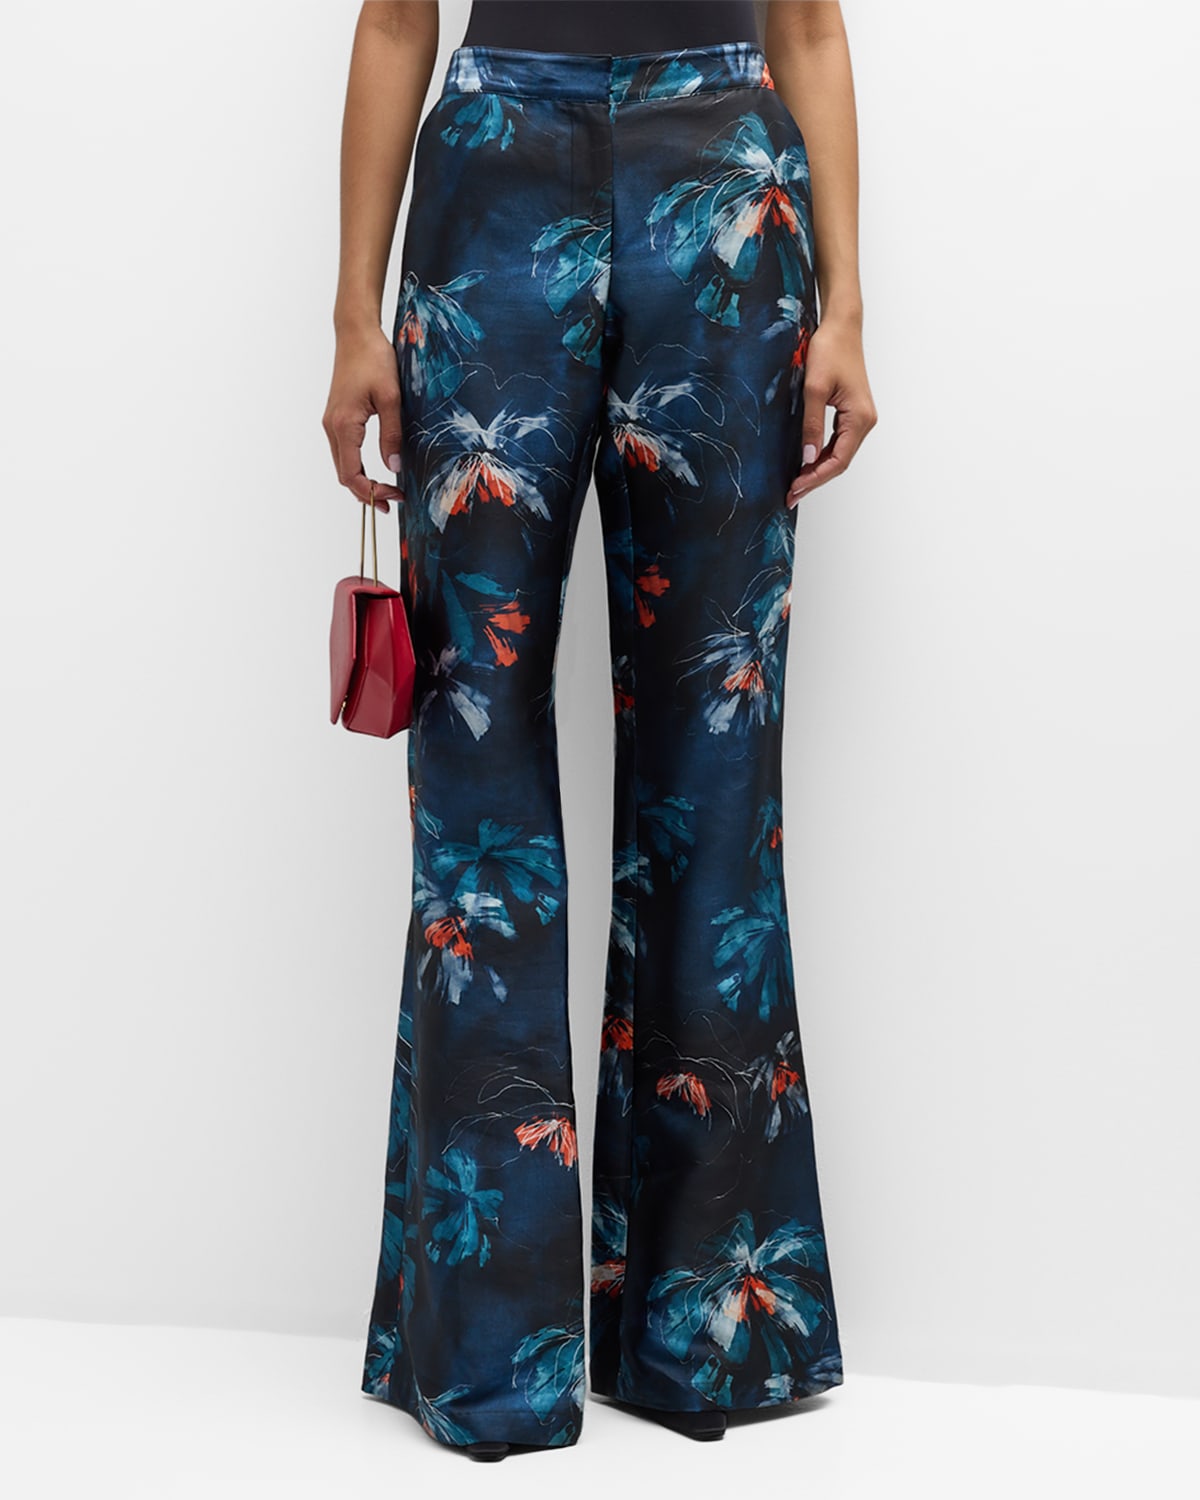 Bach Mai Flower-print Elongated Bootcut Pants In Tempest Floral